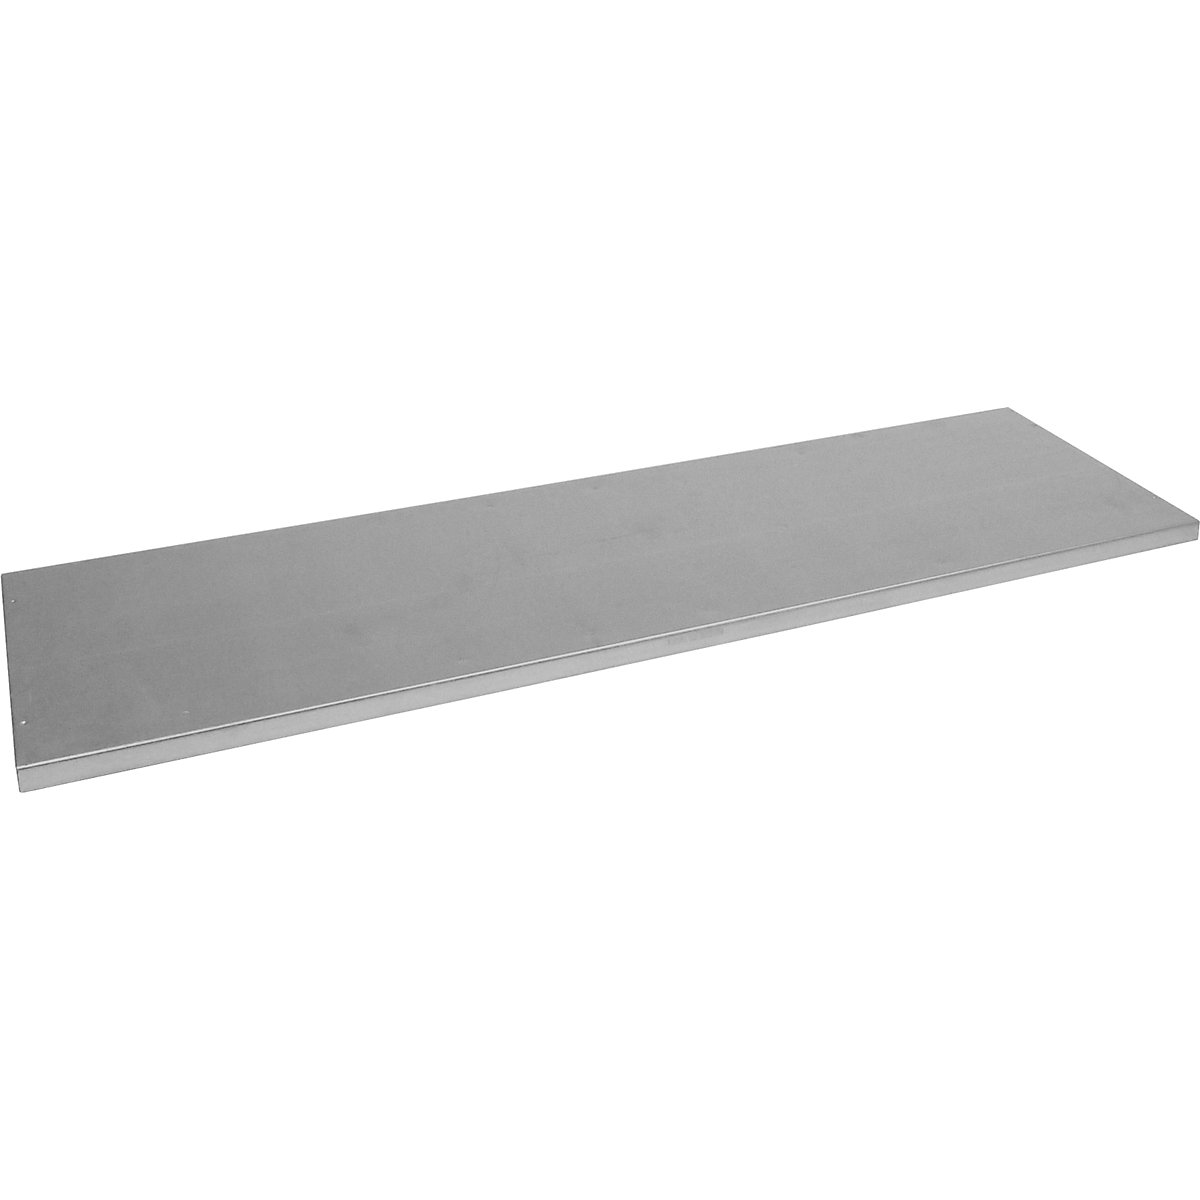 Shelf for vision panel cupboard – mauser, zinc plated, for WxD 950 x 420 mm-1